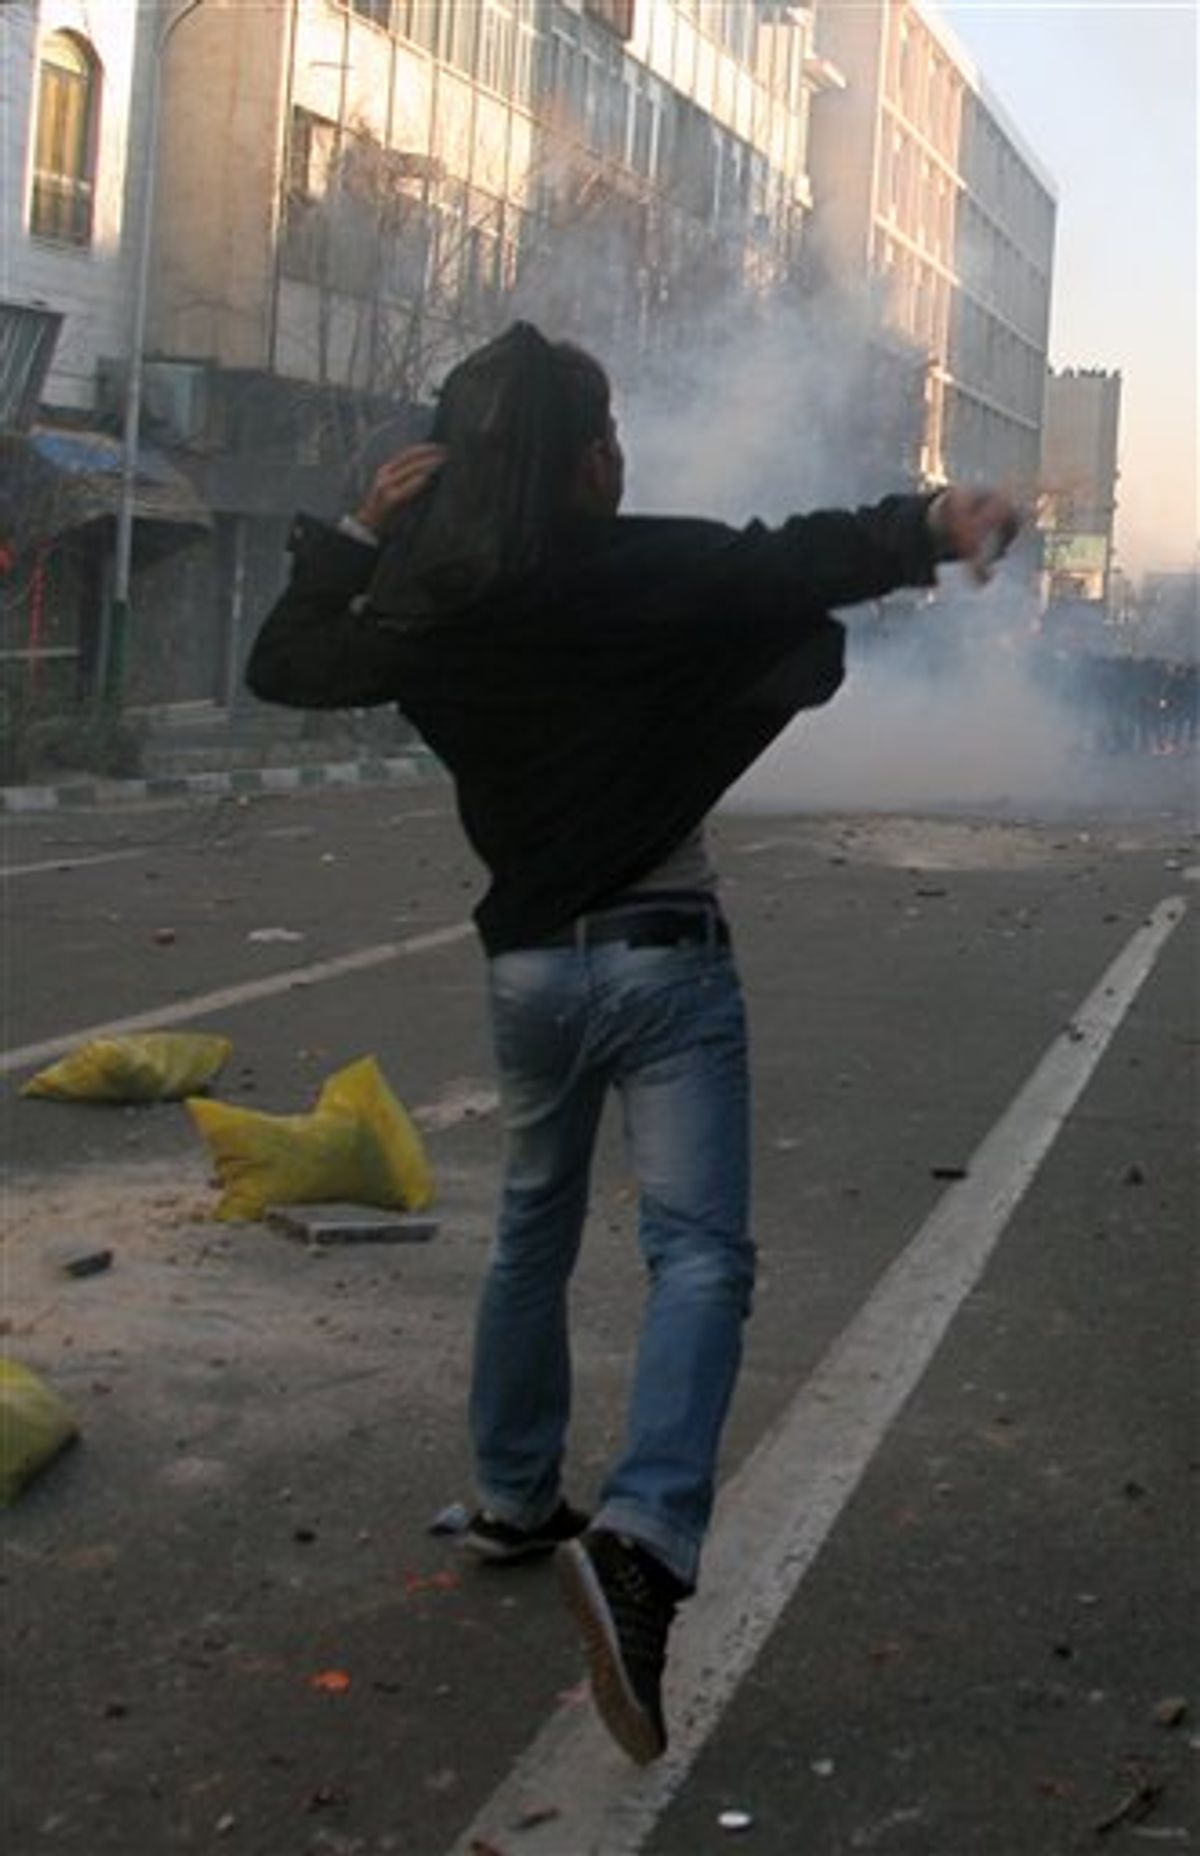 This photo, taken by an individual not employed by the Associated Press and obtained by the AP outside Iran shows an Iranian protestor throwing stone at ant-riot police officers, during an anti-government protest in Tehran, Iran, Monday, Feb. 14, 2011. Eyewitnesses report that sporadic clashes have erupted in central Tehran's Enghelab or Revolution square between security forces and opposition protesters. The demonstrators were chanting "death to the dictator," referring to the country's hardline president that the opposition believes was reelected through fraud in 2009. (AP Photo) EDITORS NOTE AS A RESULT OF AN OFFICIAL IRANIAN GOVERNMENT BAN ON FOREIGN MEDIA COVERING SOME EVENTS IN IRAN, THE AP WAS PREVENTED FROM INDEPENDENT ACCESS TO THIS EVENT (AP)